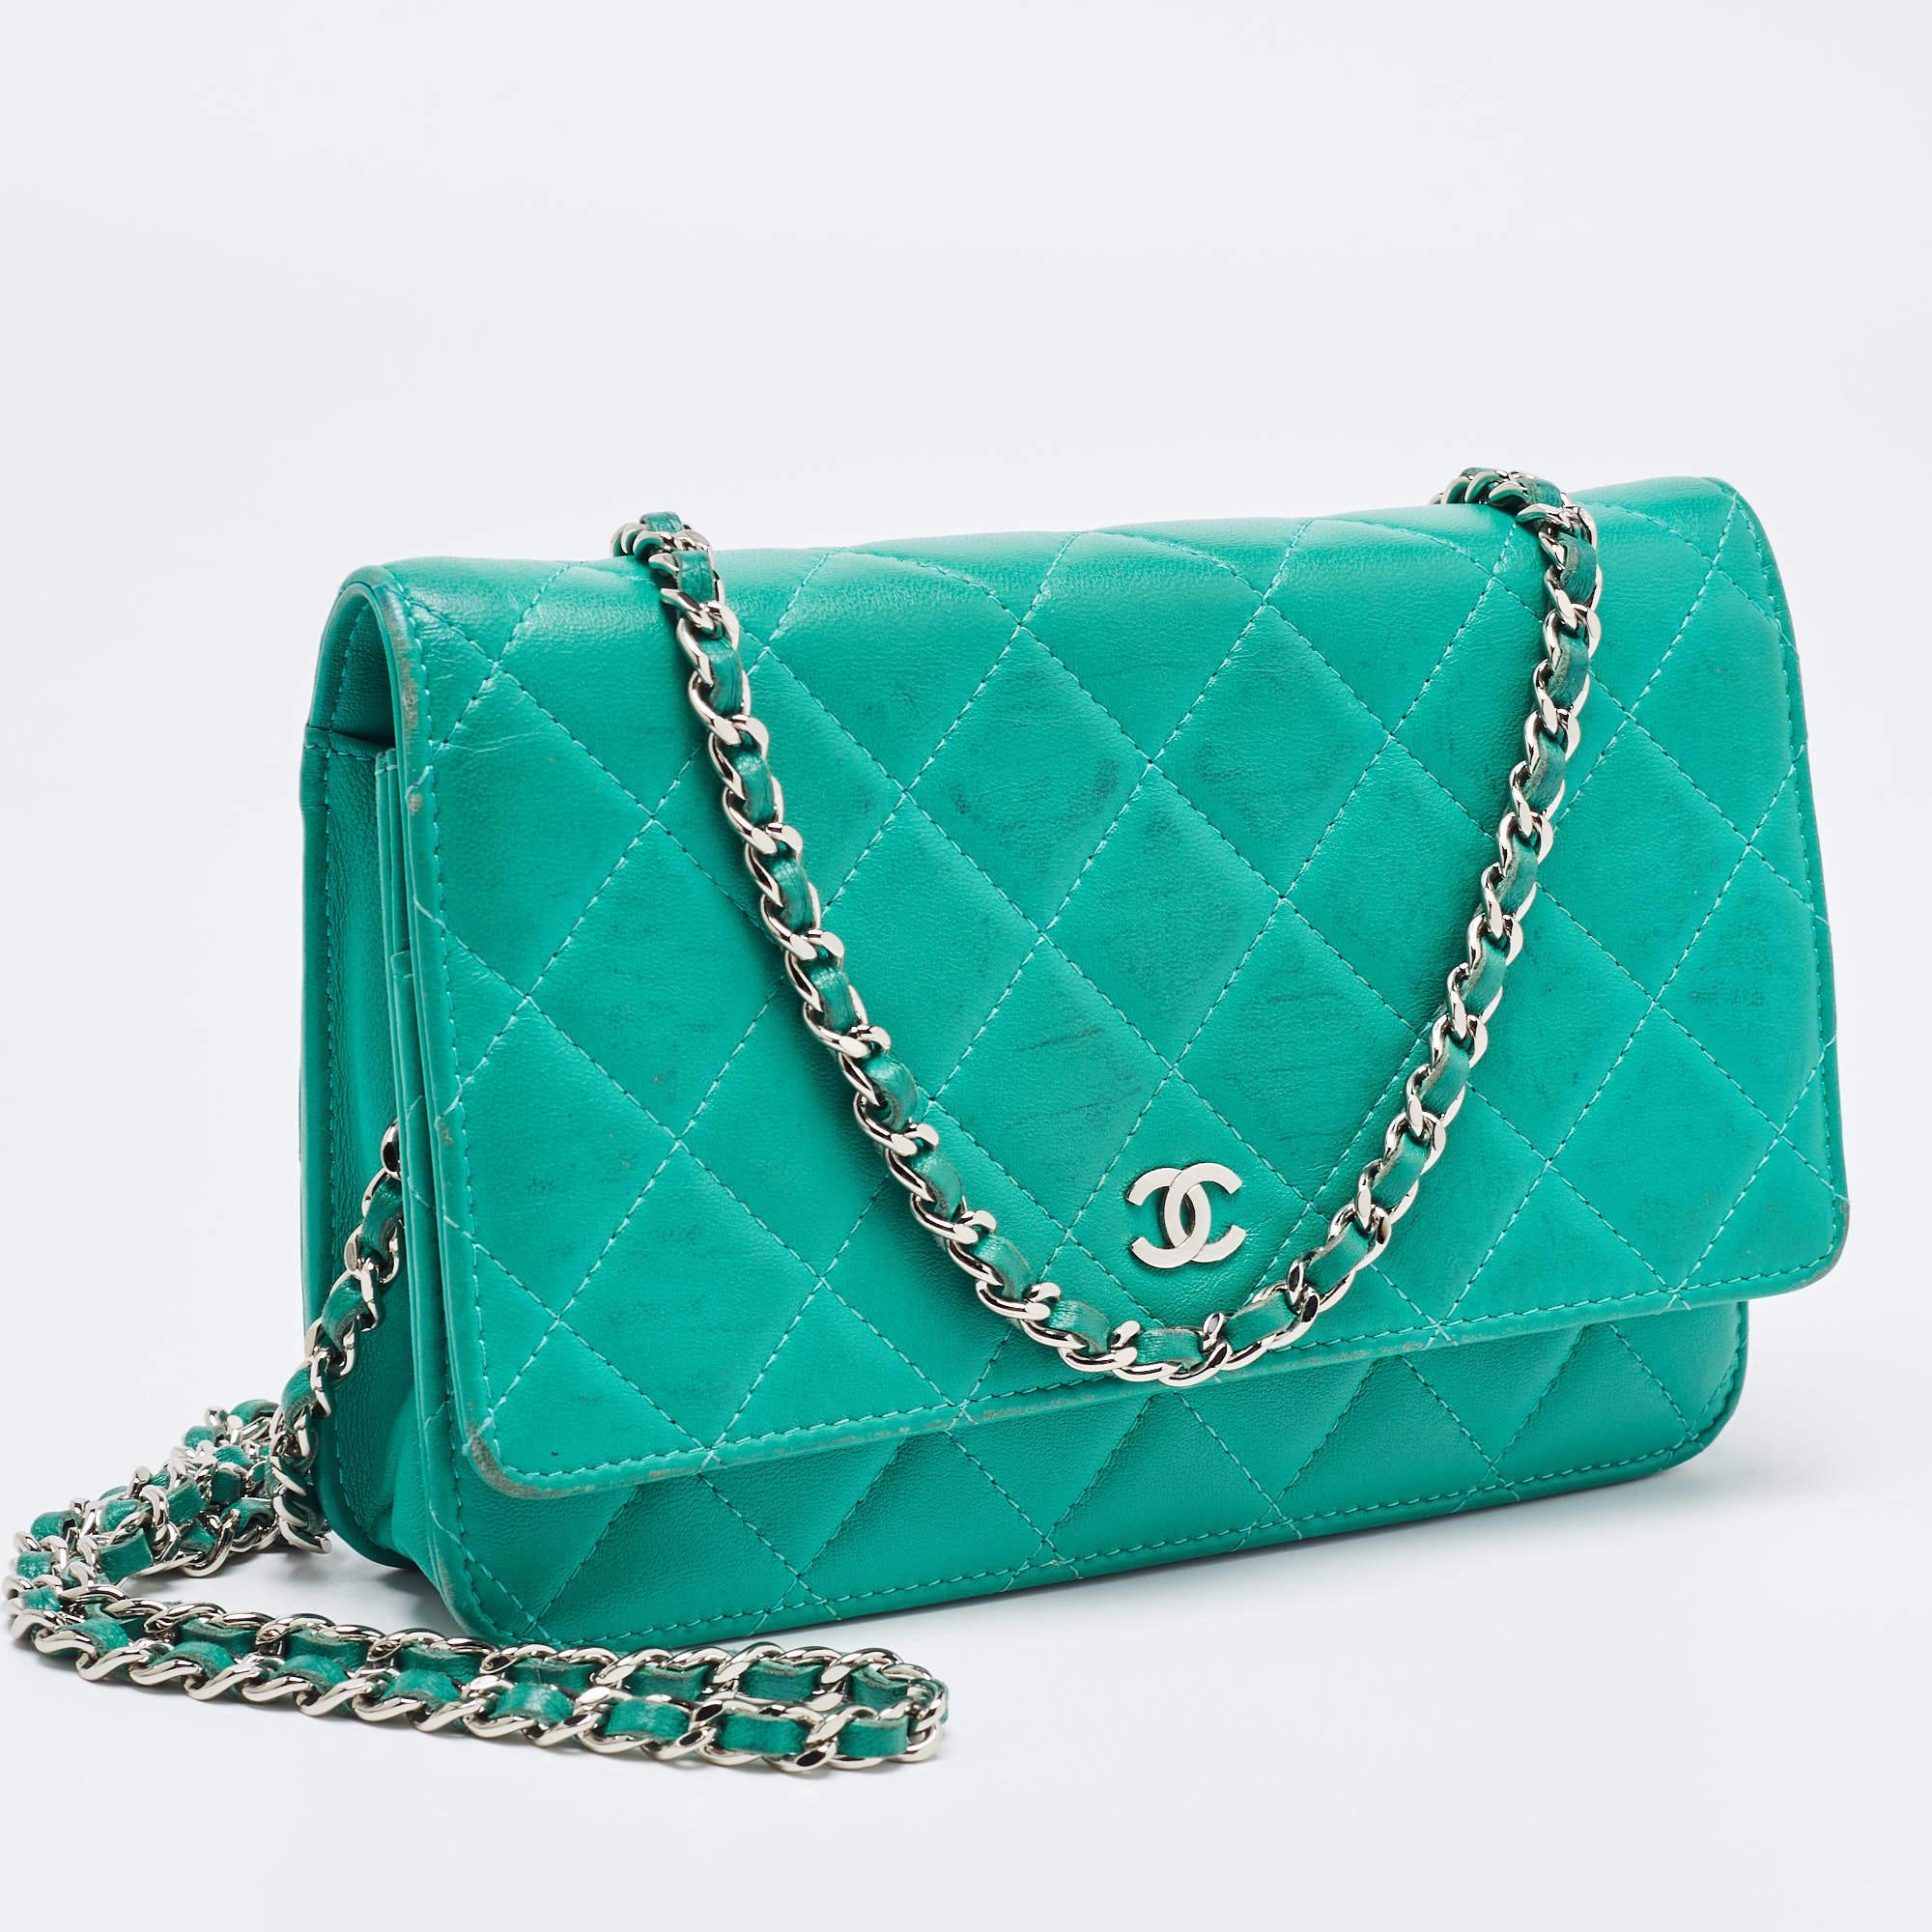 Chanel Green Leather CC Wallet On Chain In Good Condition For Sale In Dubai, Al Qouz 2